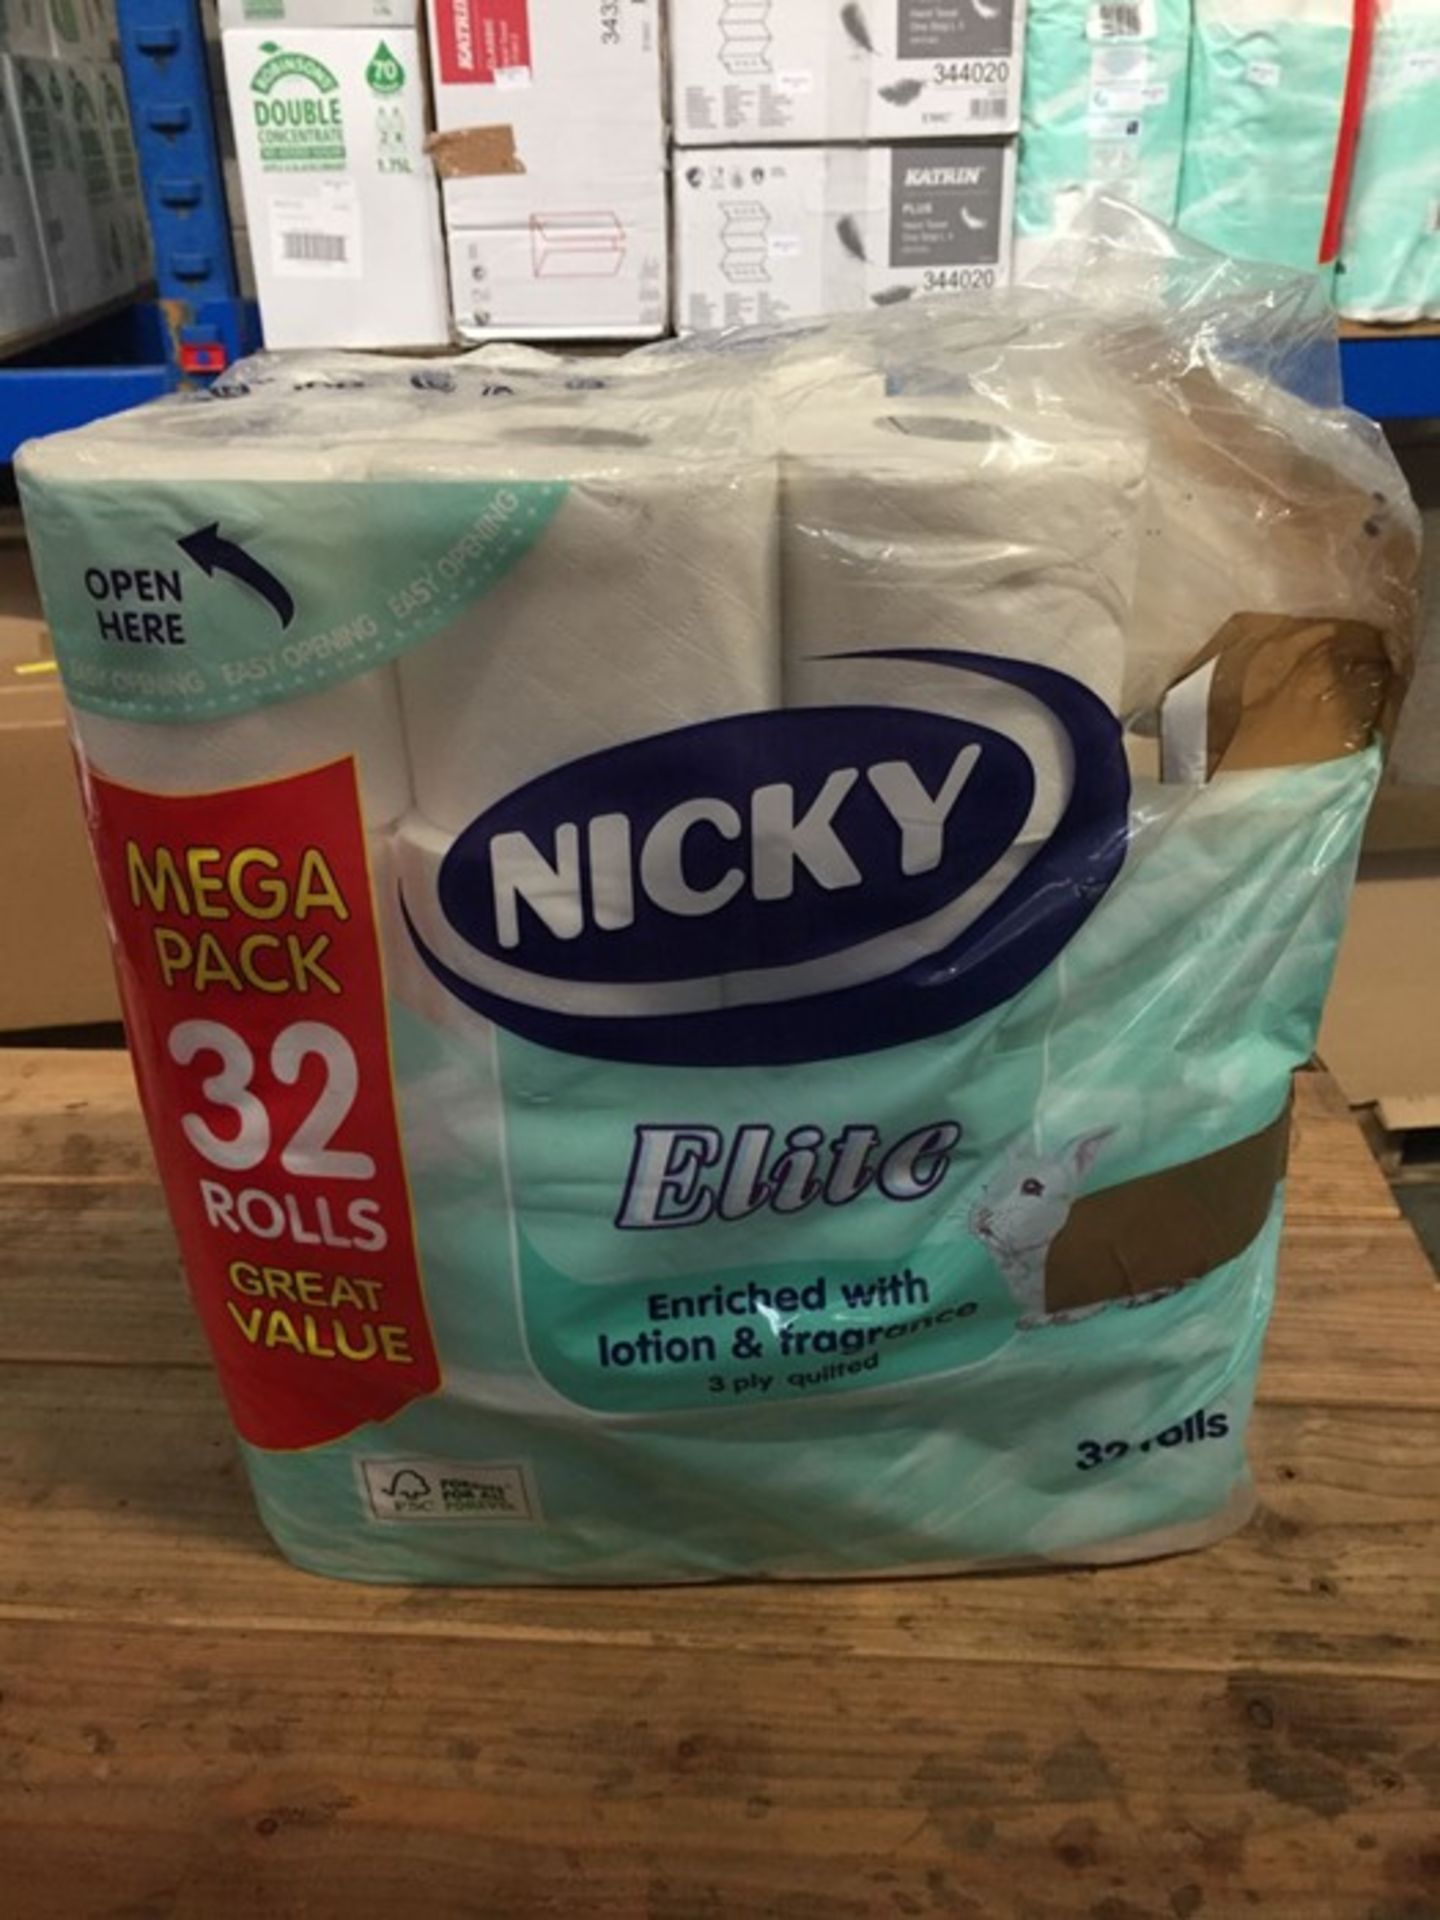 1 LOT TO CONTAIN A PACK OF 30 X NICKY ELITE TOILET ROLLS - L3